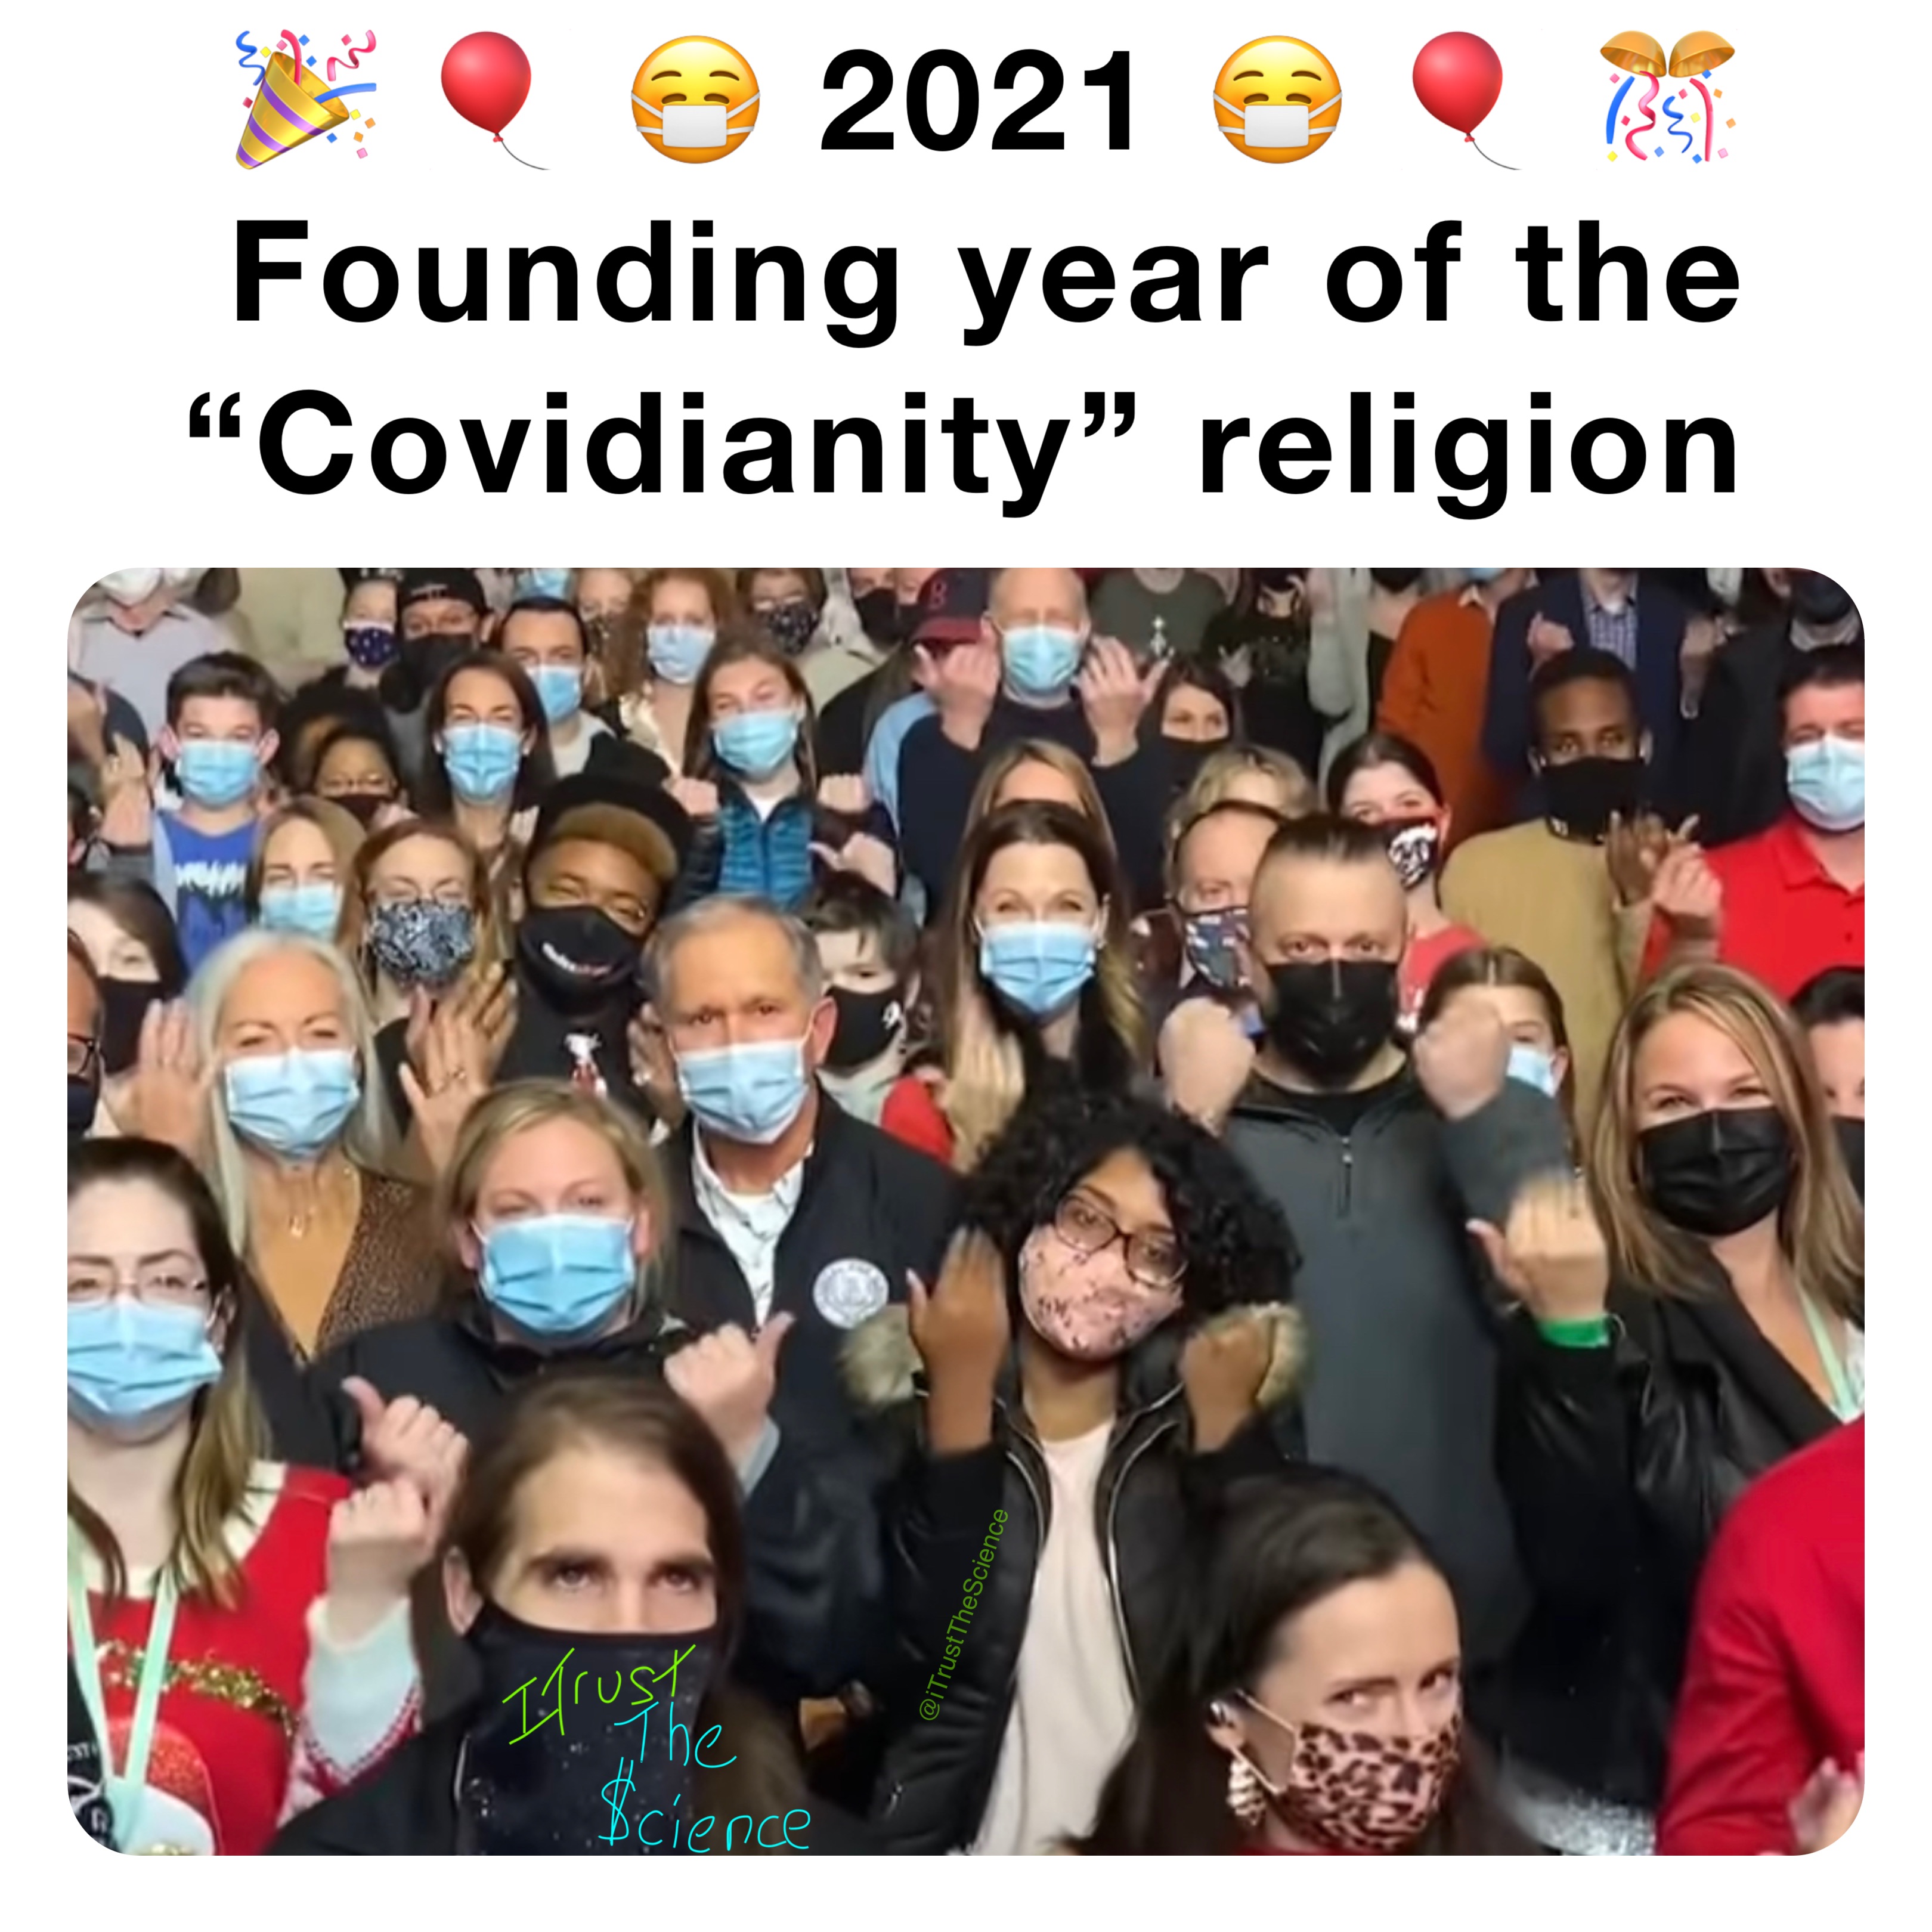 🎉 🎈 😷 2021 😷 🎈 🎊 
Founding year of the “Covidianity” religion